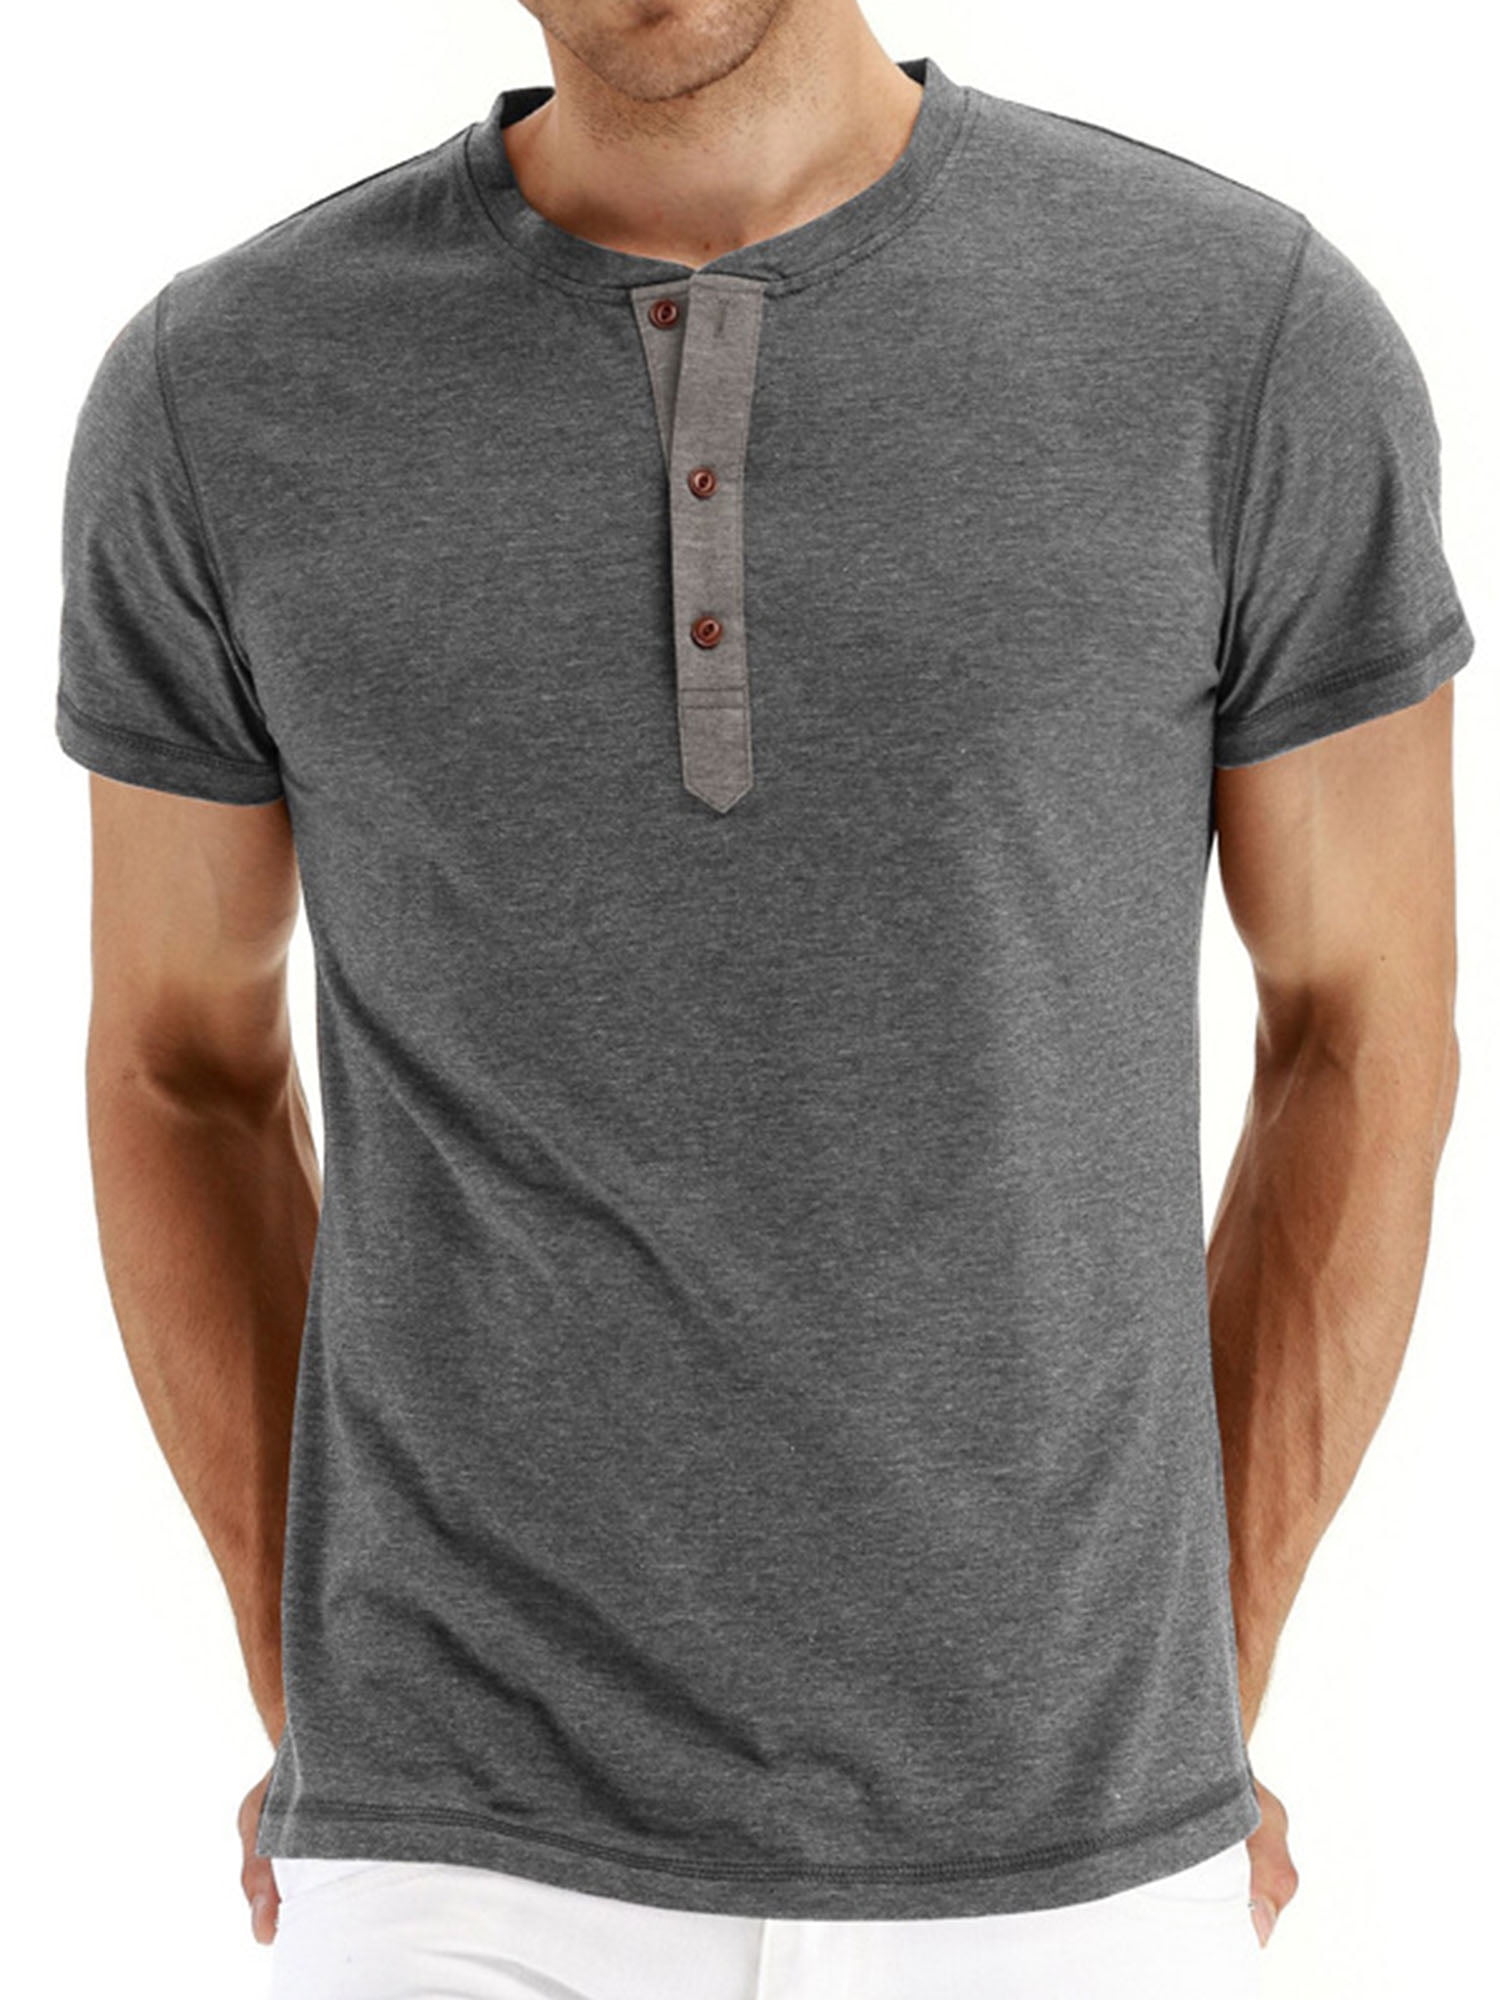 Slim Fit T-Shirts Men Casual Tee Blouse 